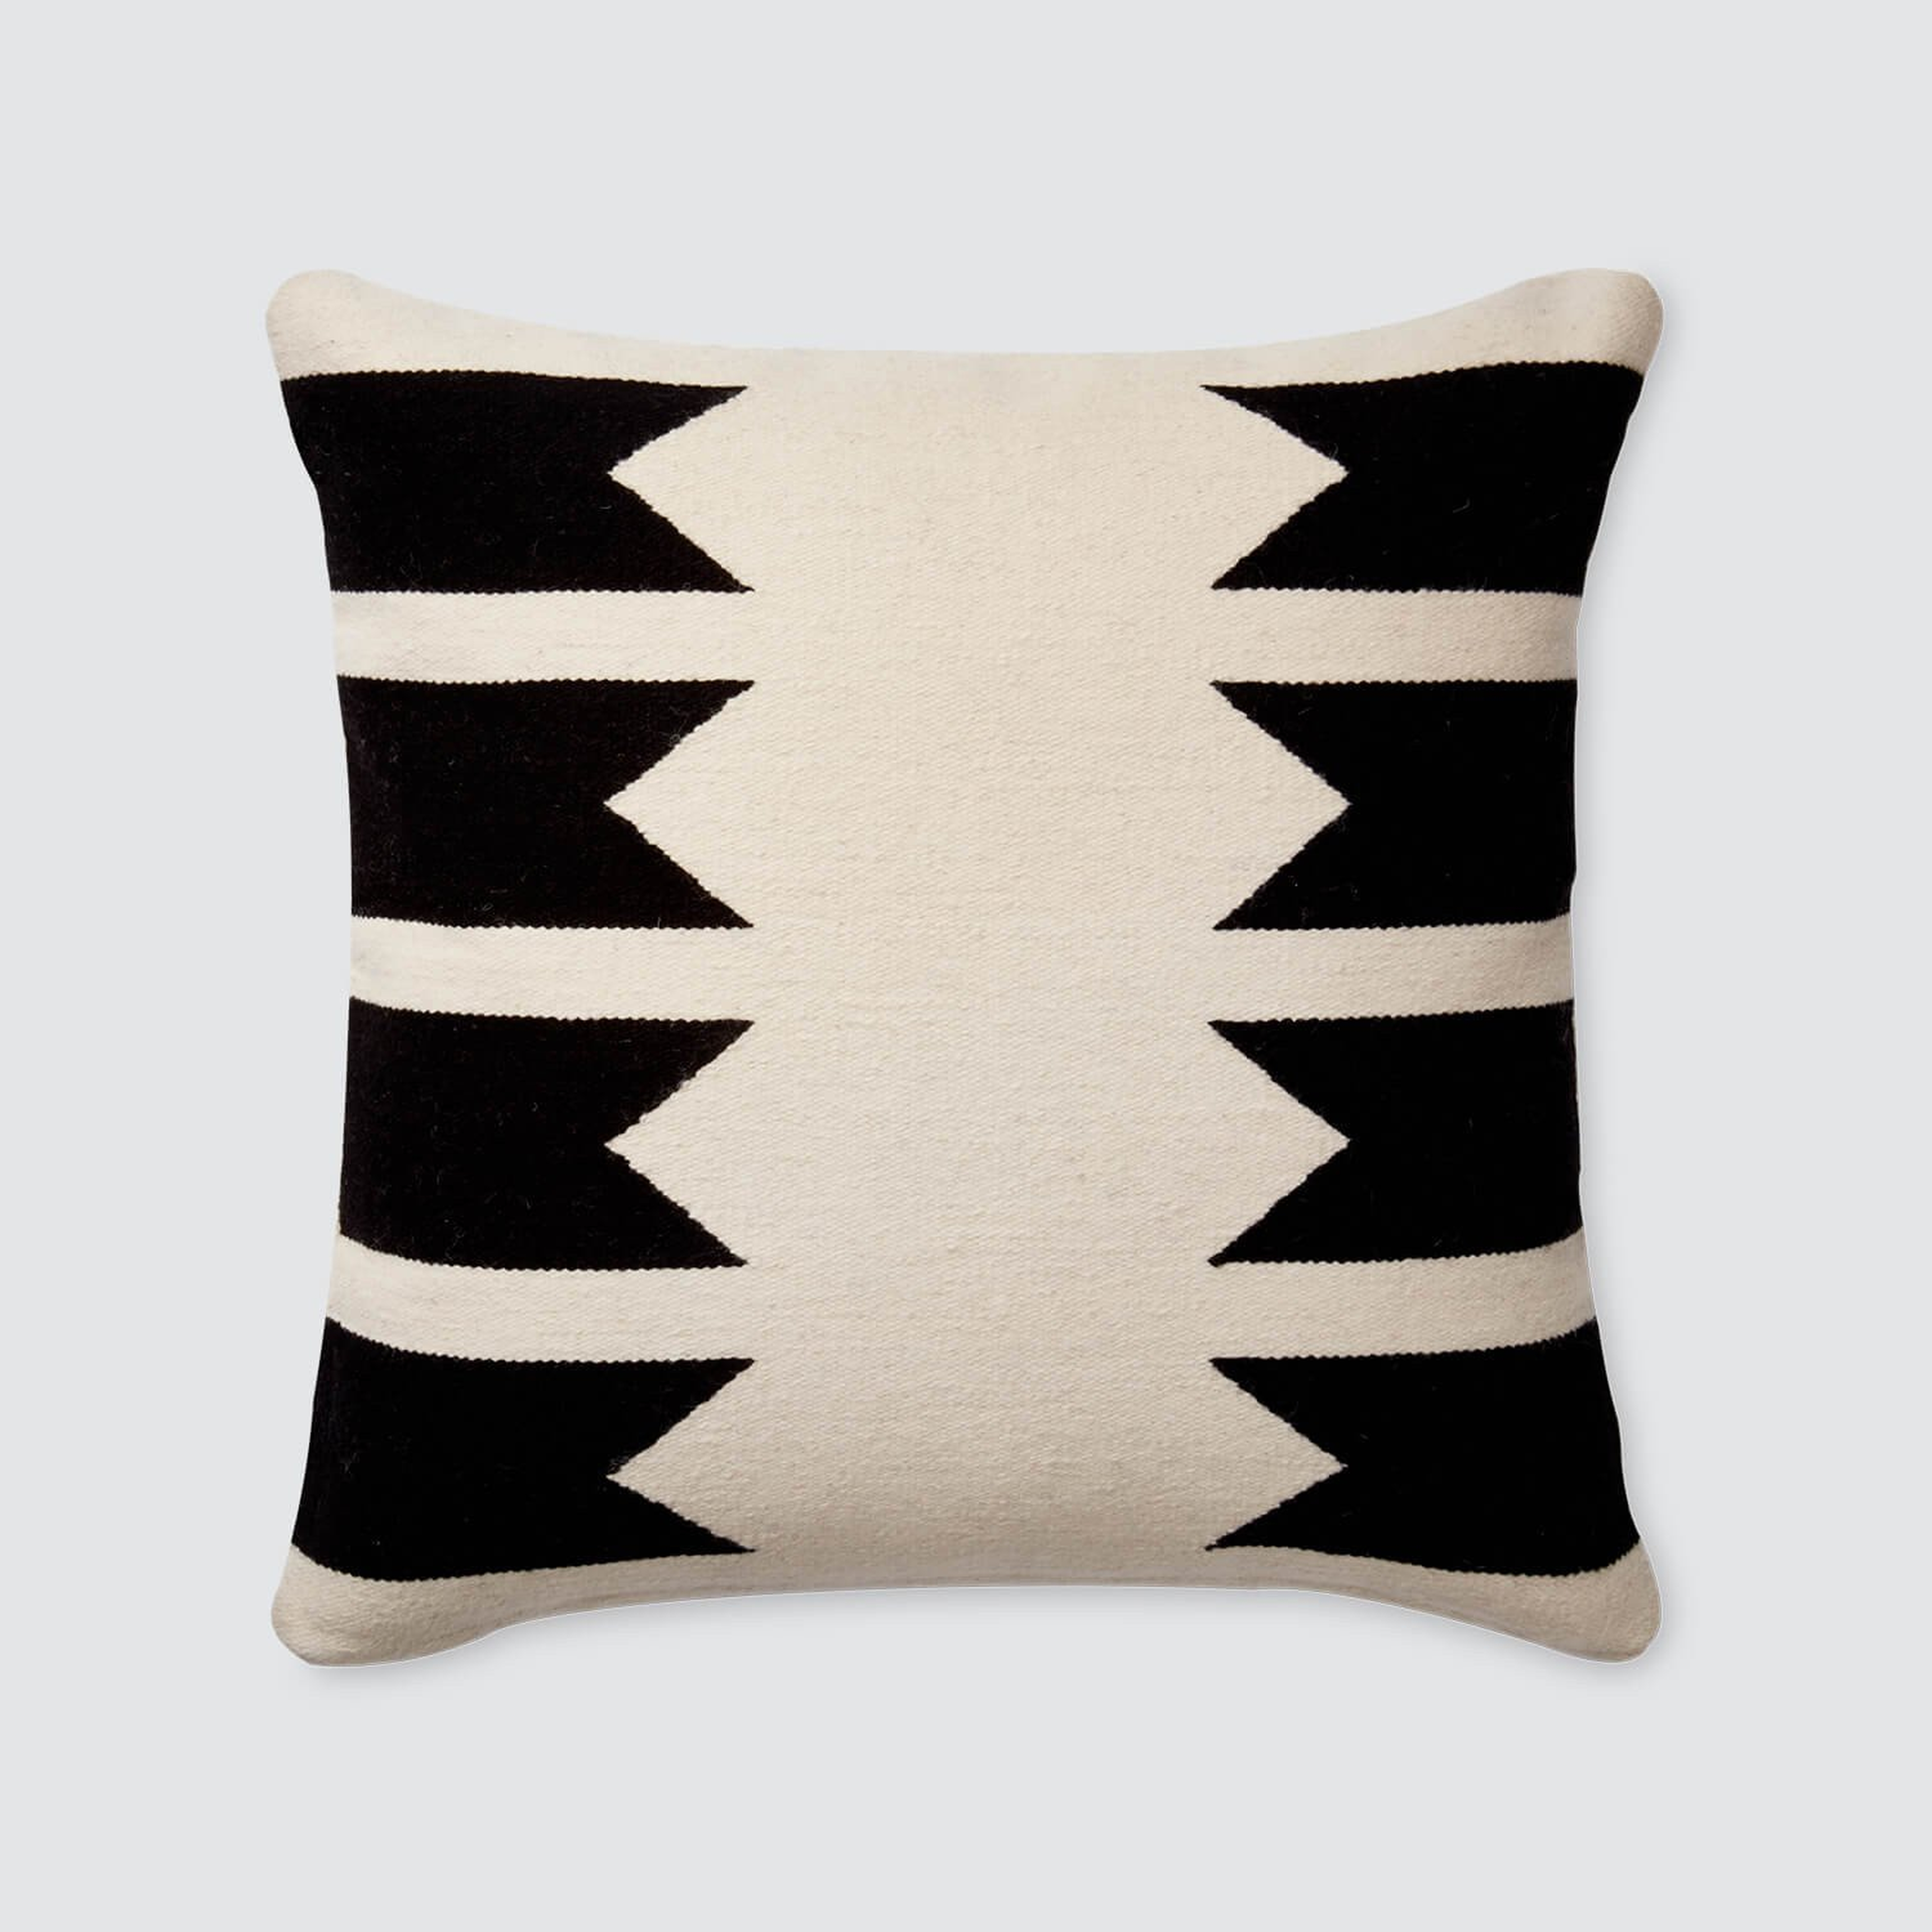 Urbano Pillows - Black - 22 in. x 22 in. By The Citizenry - The Citizenry